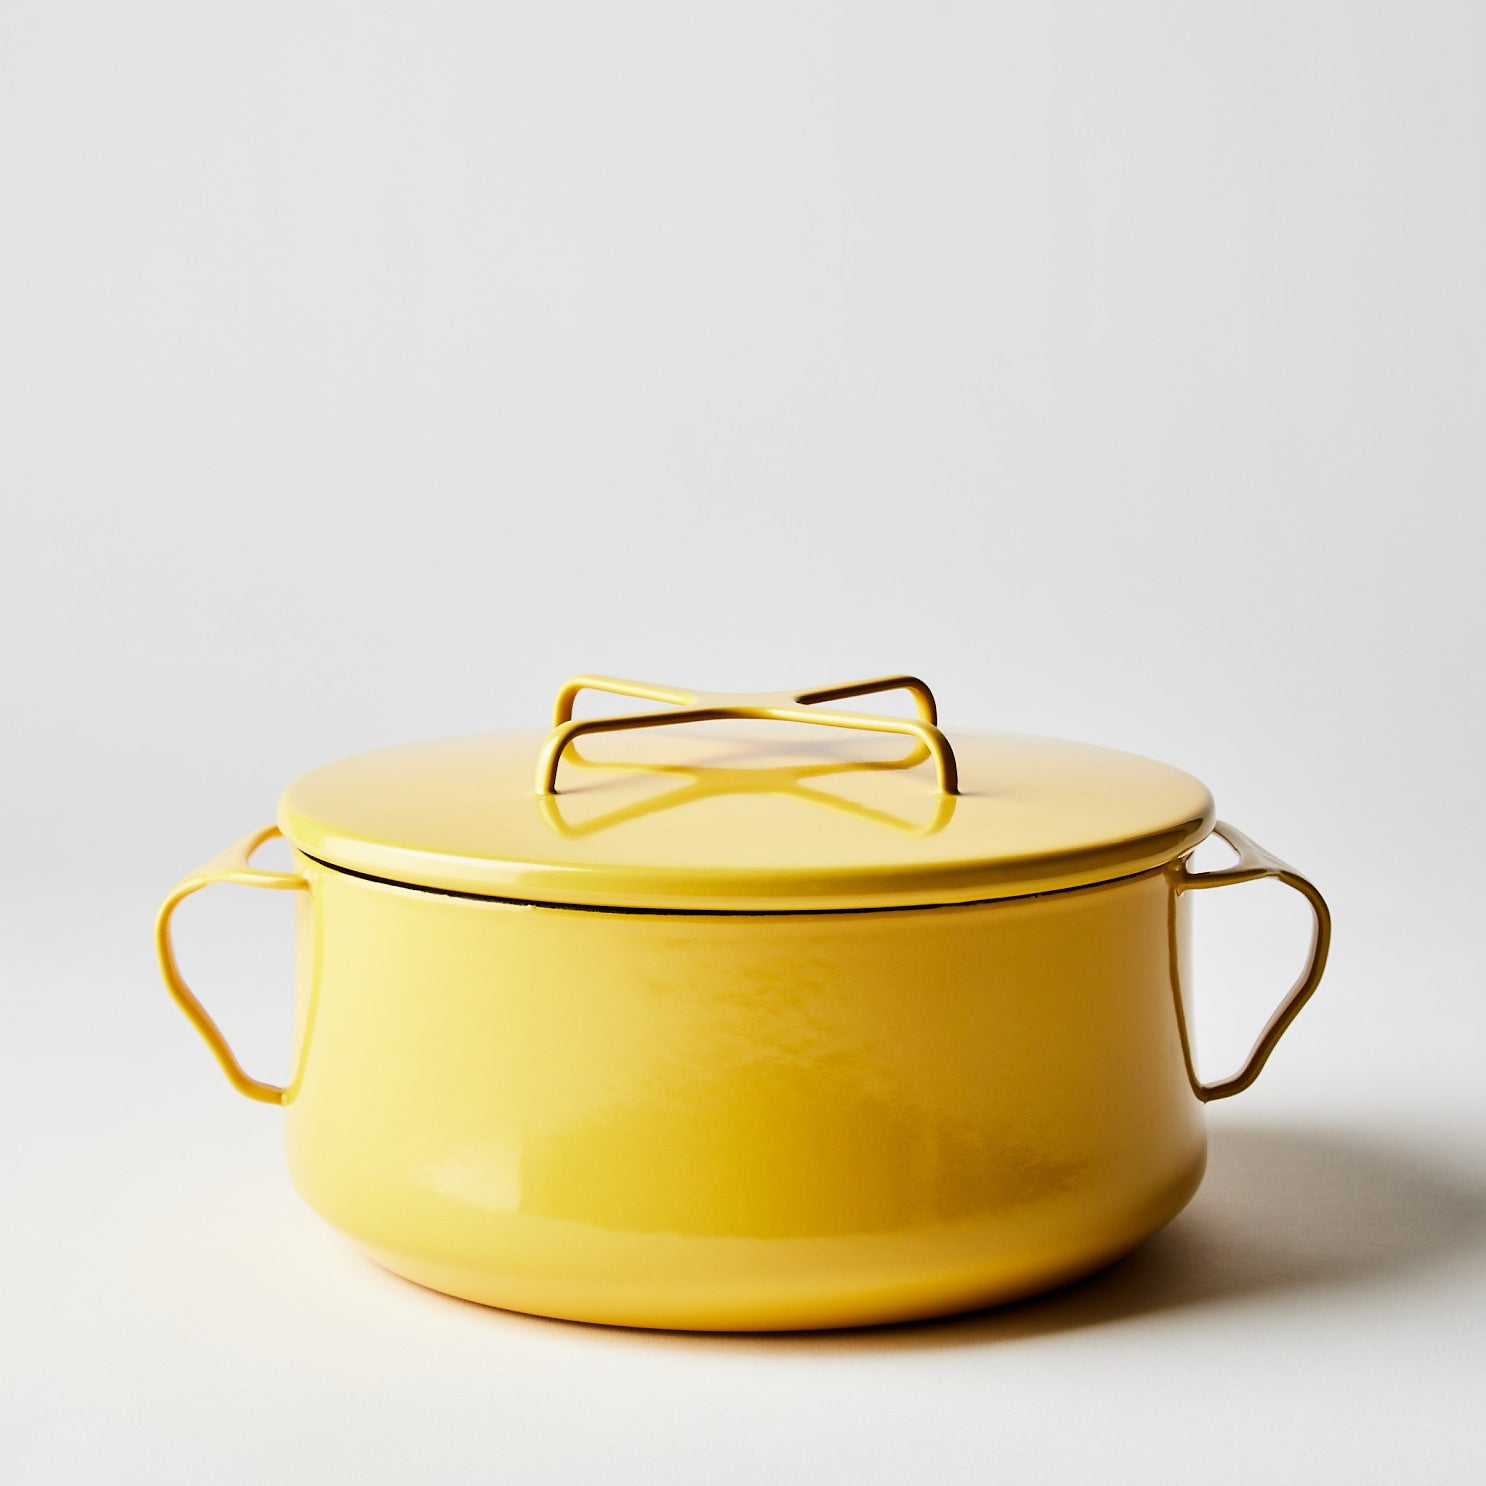 Thank you all for introducing me to Dansk cookware : r